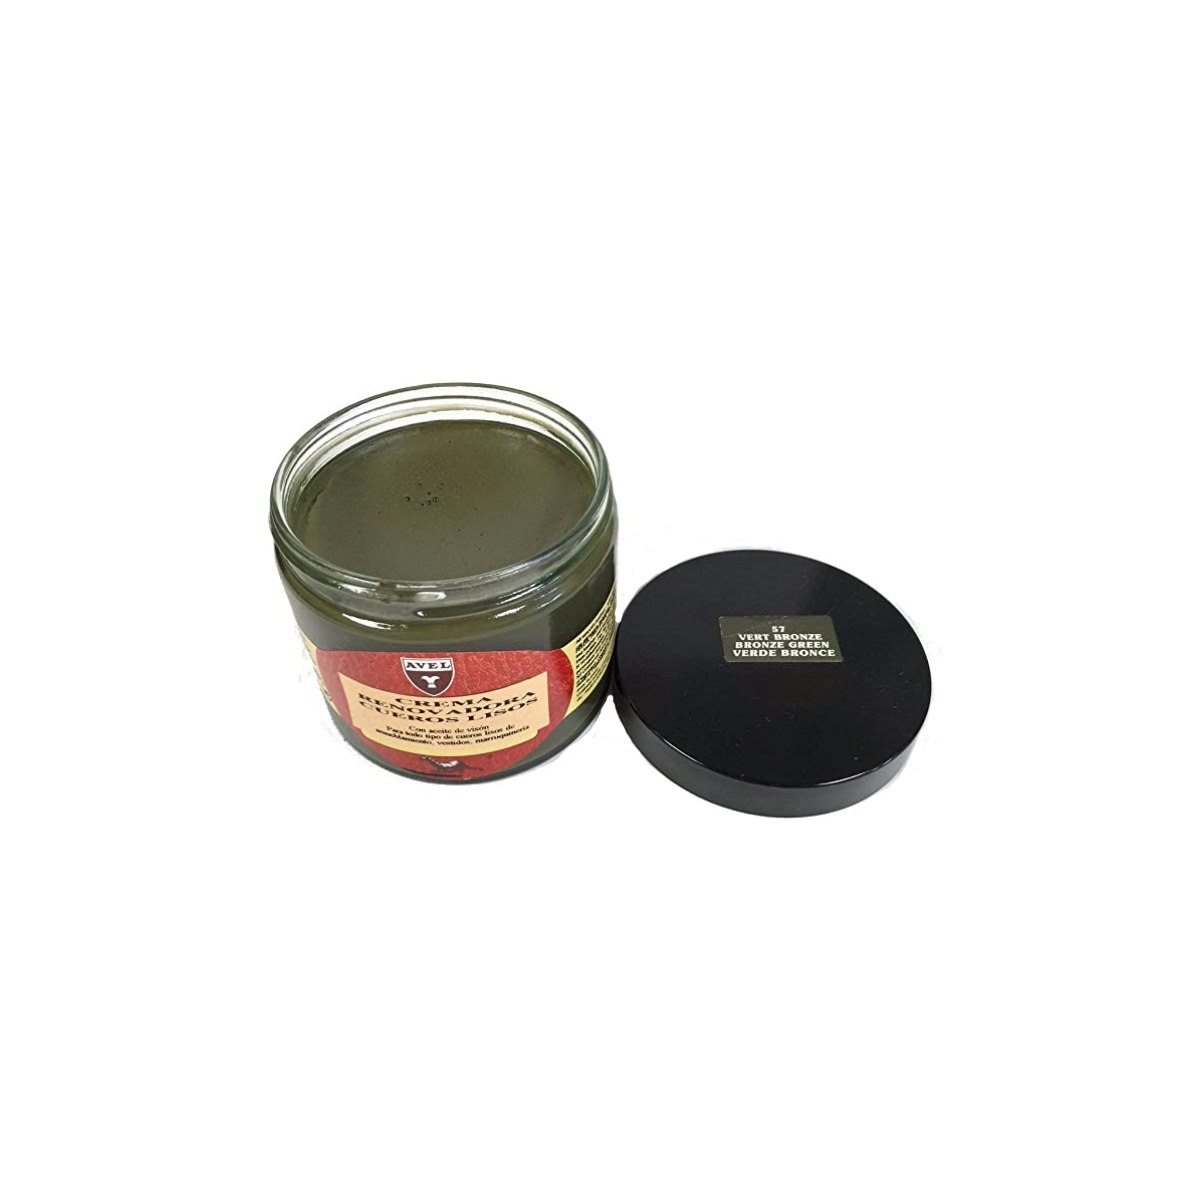 Avel Leather Renovator Recolouring Balm Bronze Green 250ml (Number 57)